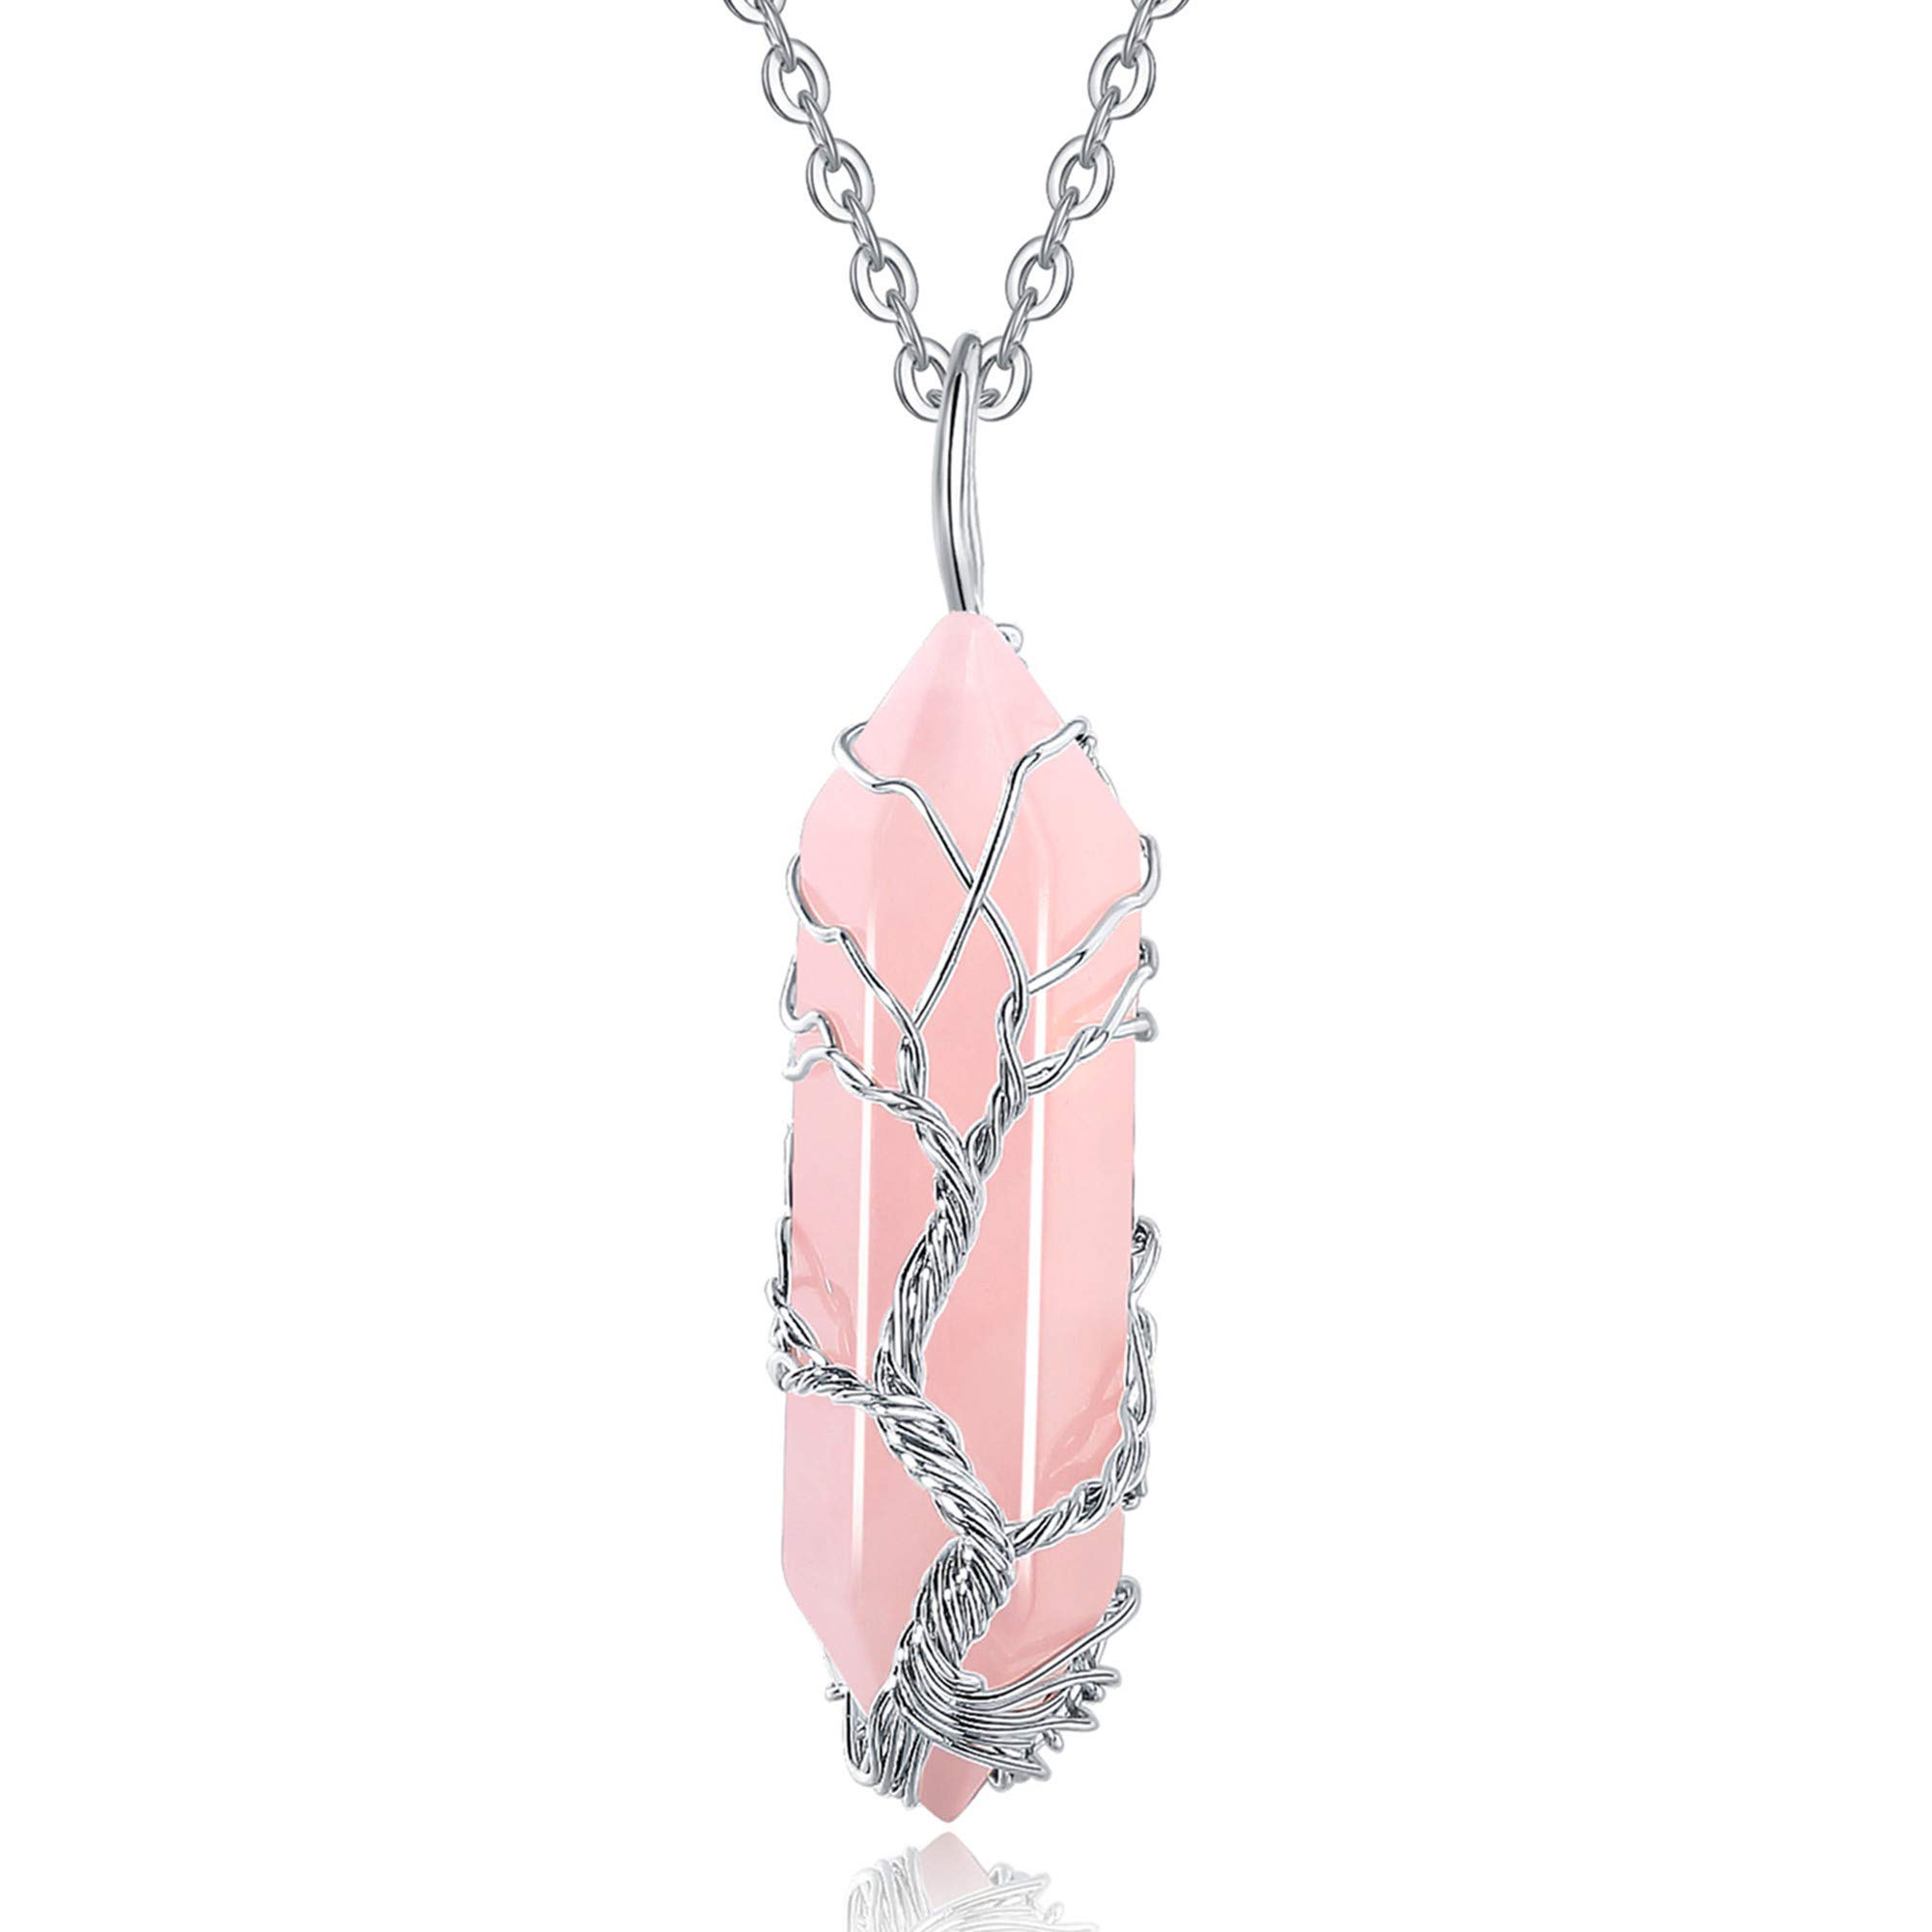 healing crystal pendant necklace